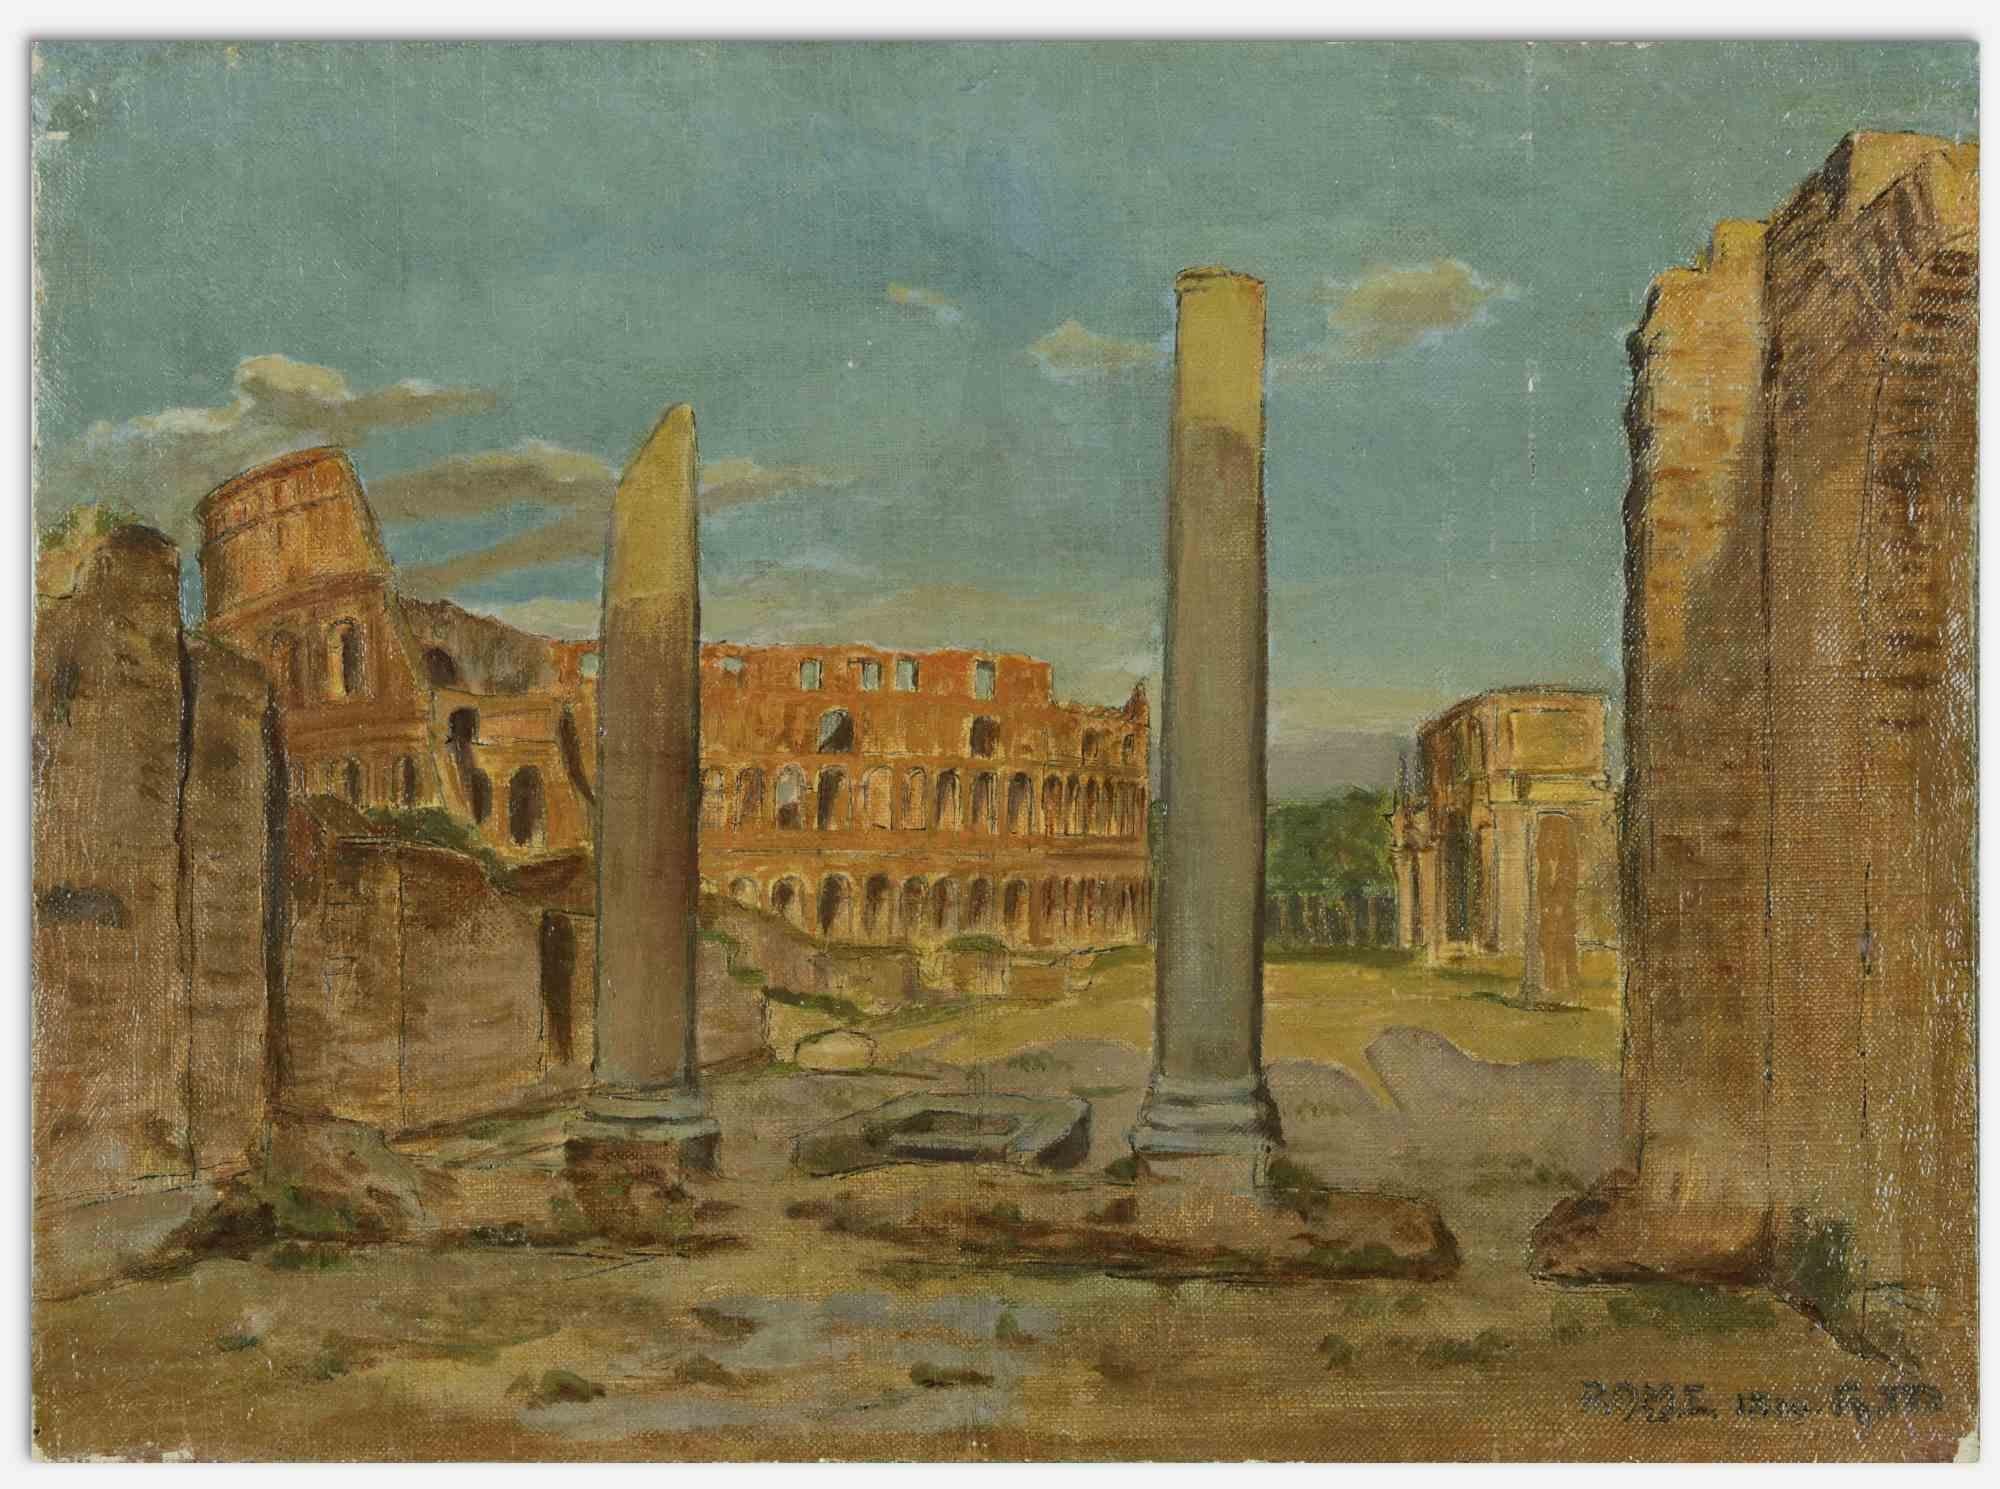 Unknown Landscape Painting - Imperial Forums and Coliseum on the Background - Oil Paint - 1899